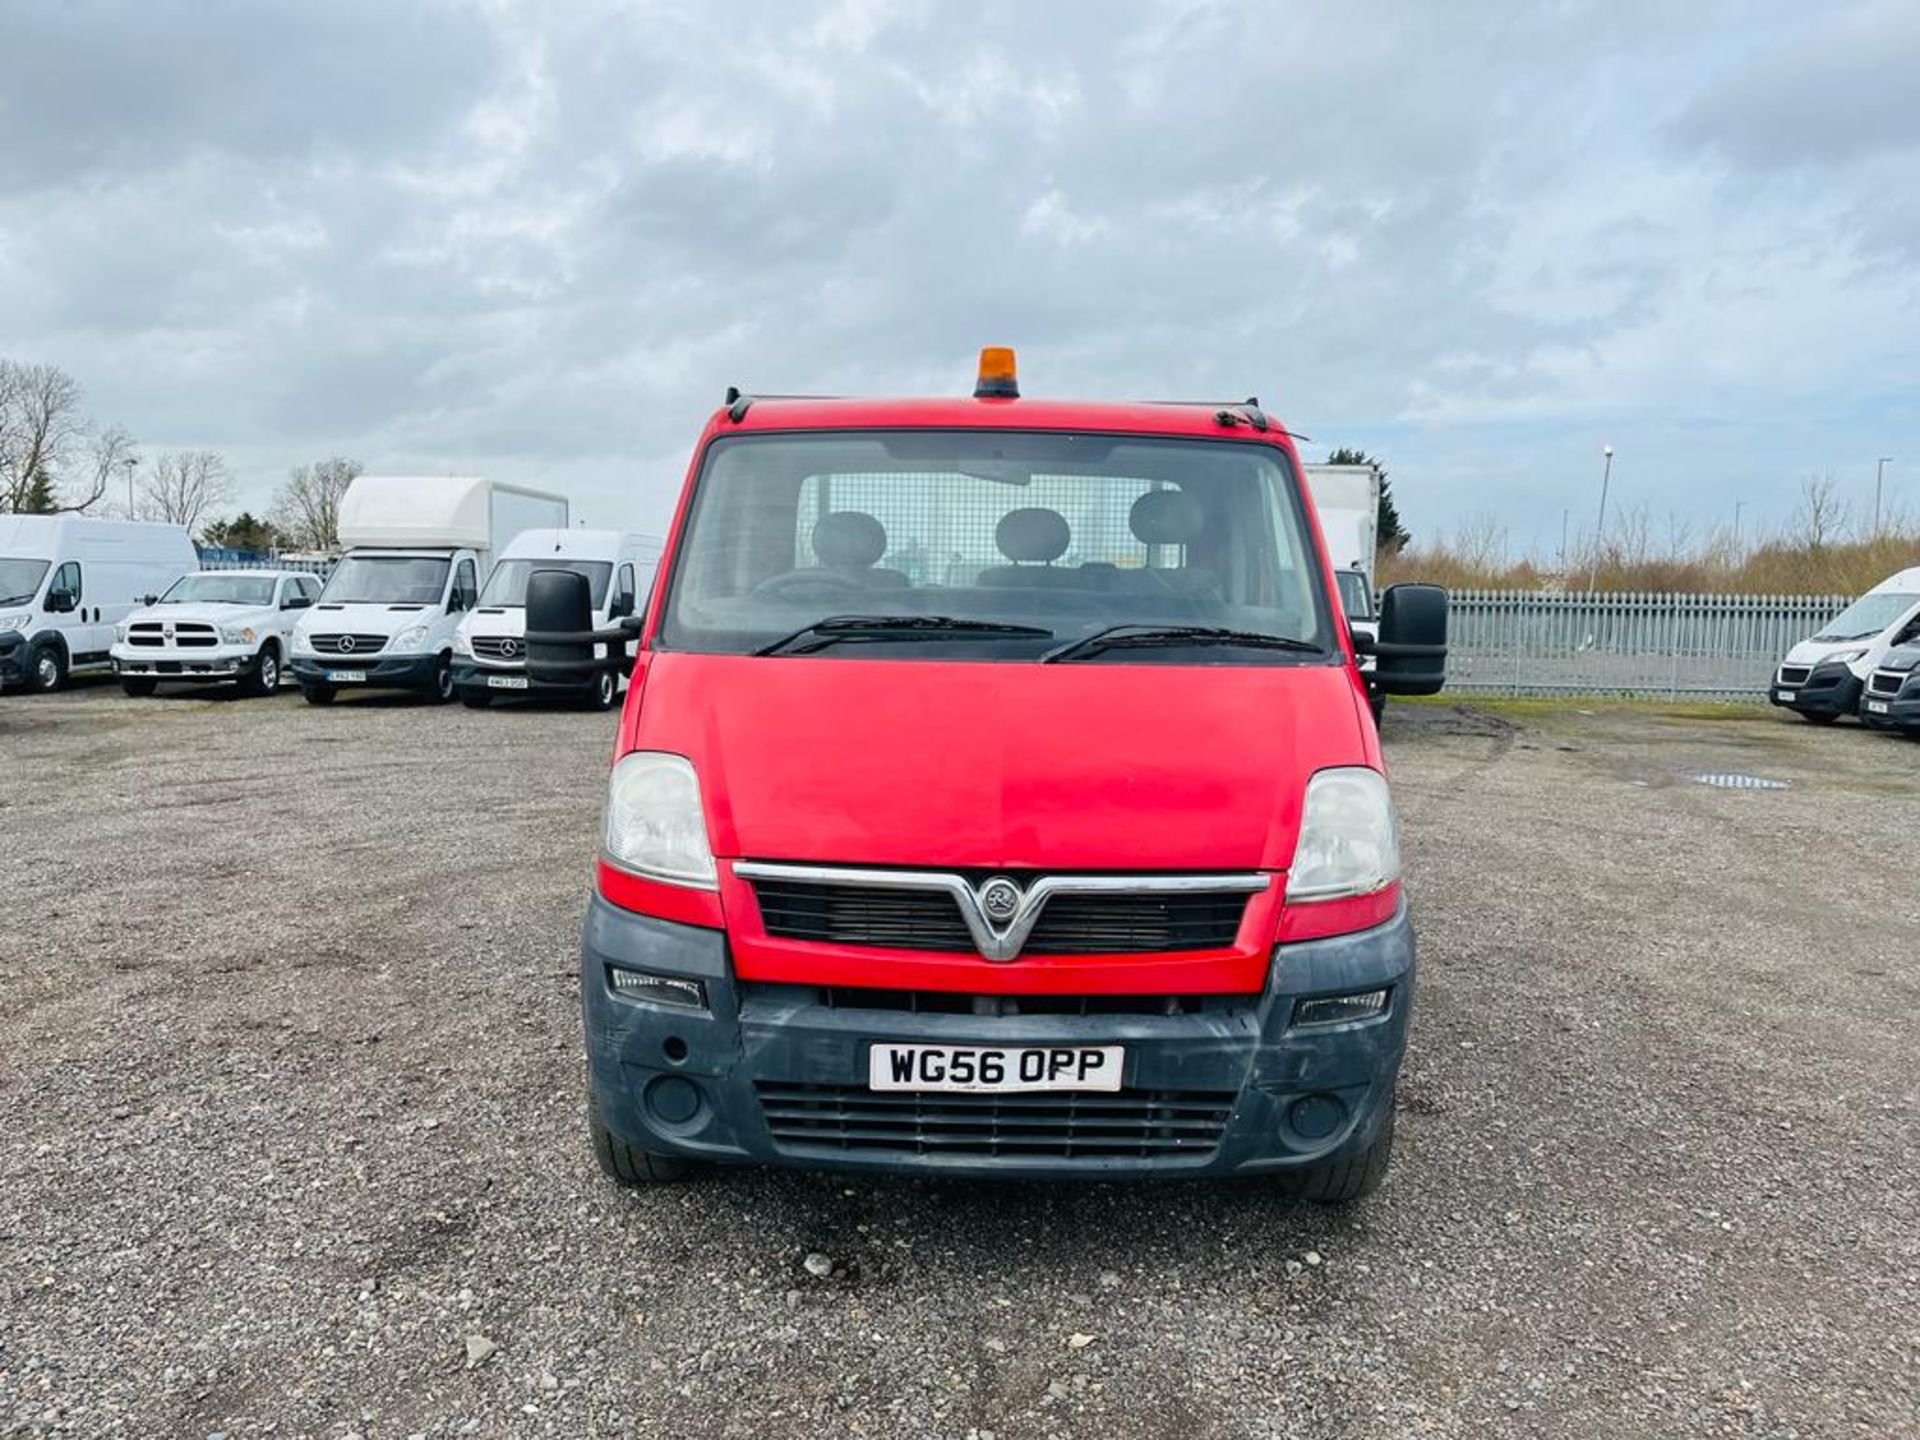 ** ON SALE ** Vauxhall Movano 2.5 CDTI 3500 L2 Tipper 2007 '56 Reg' - Only 78,295 Miles - Image 2 of 24